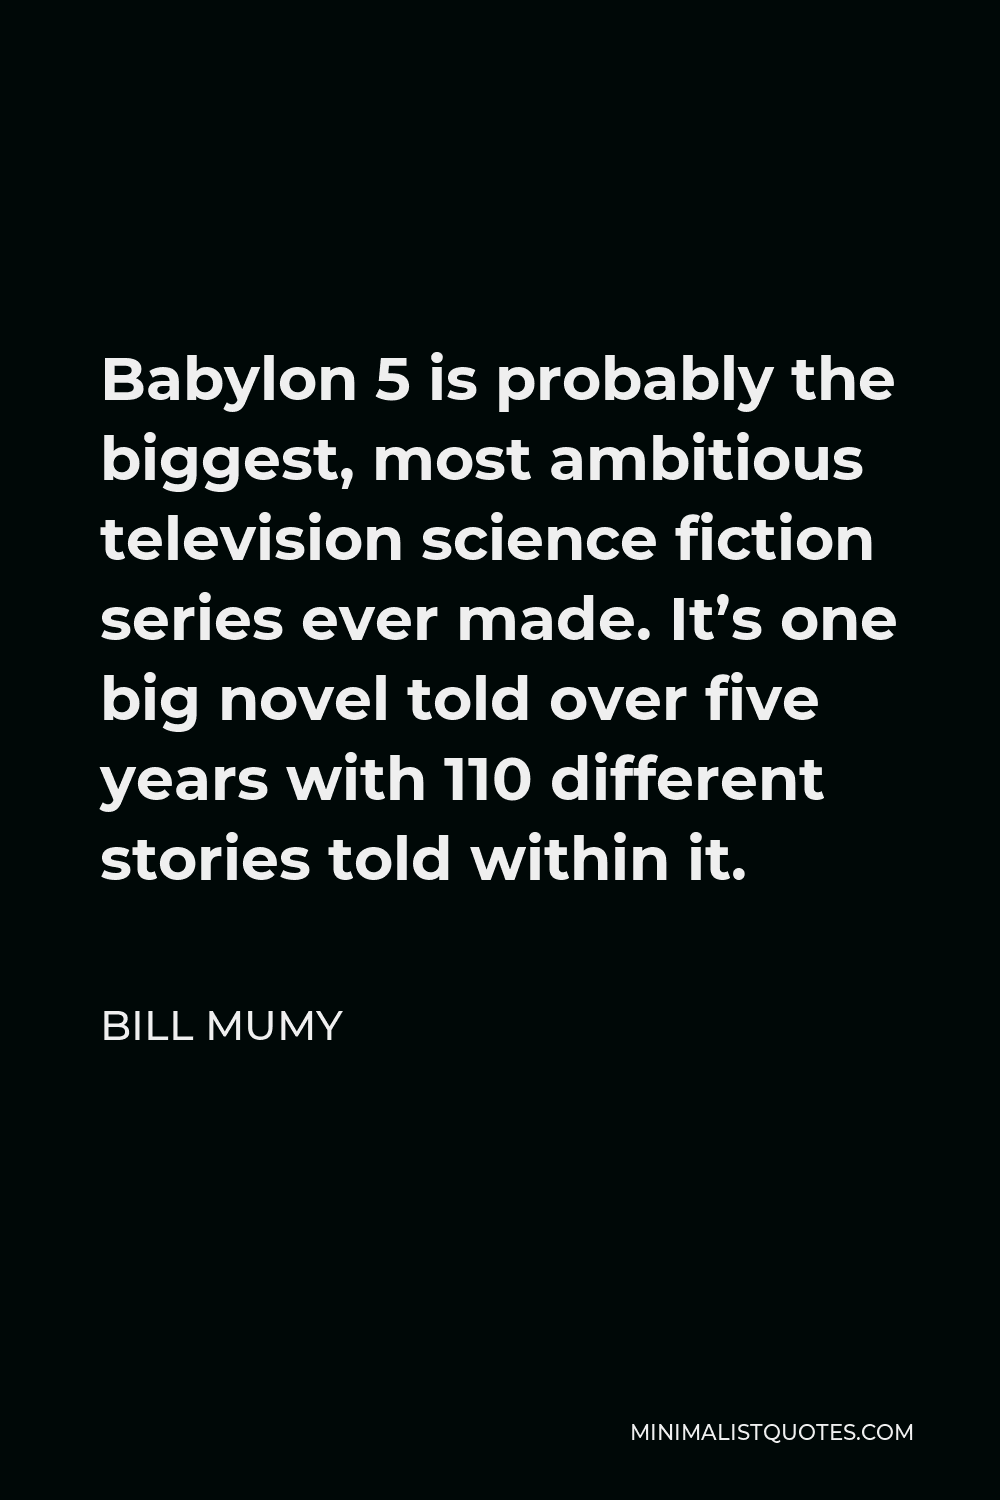 Bill Mumy Quote - Babylon 5 is probably the biggest, most ambitious television science fiction series ever made. It’s one big novel told over five years with 110 different stories told within it.